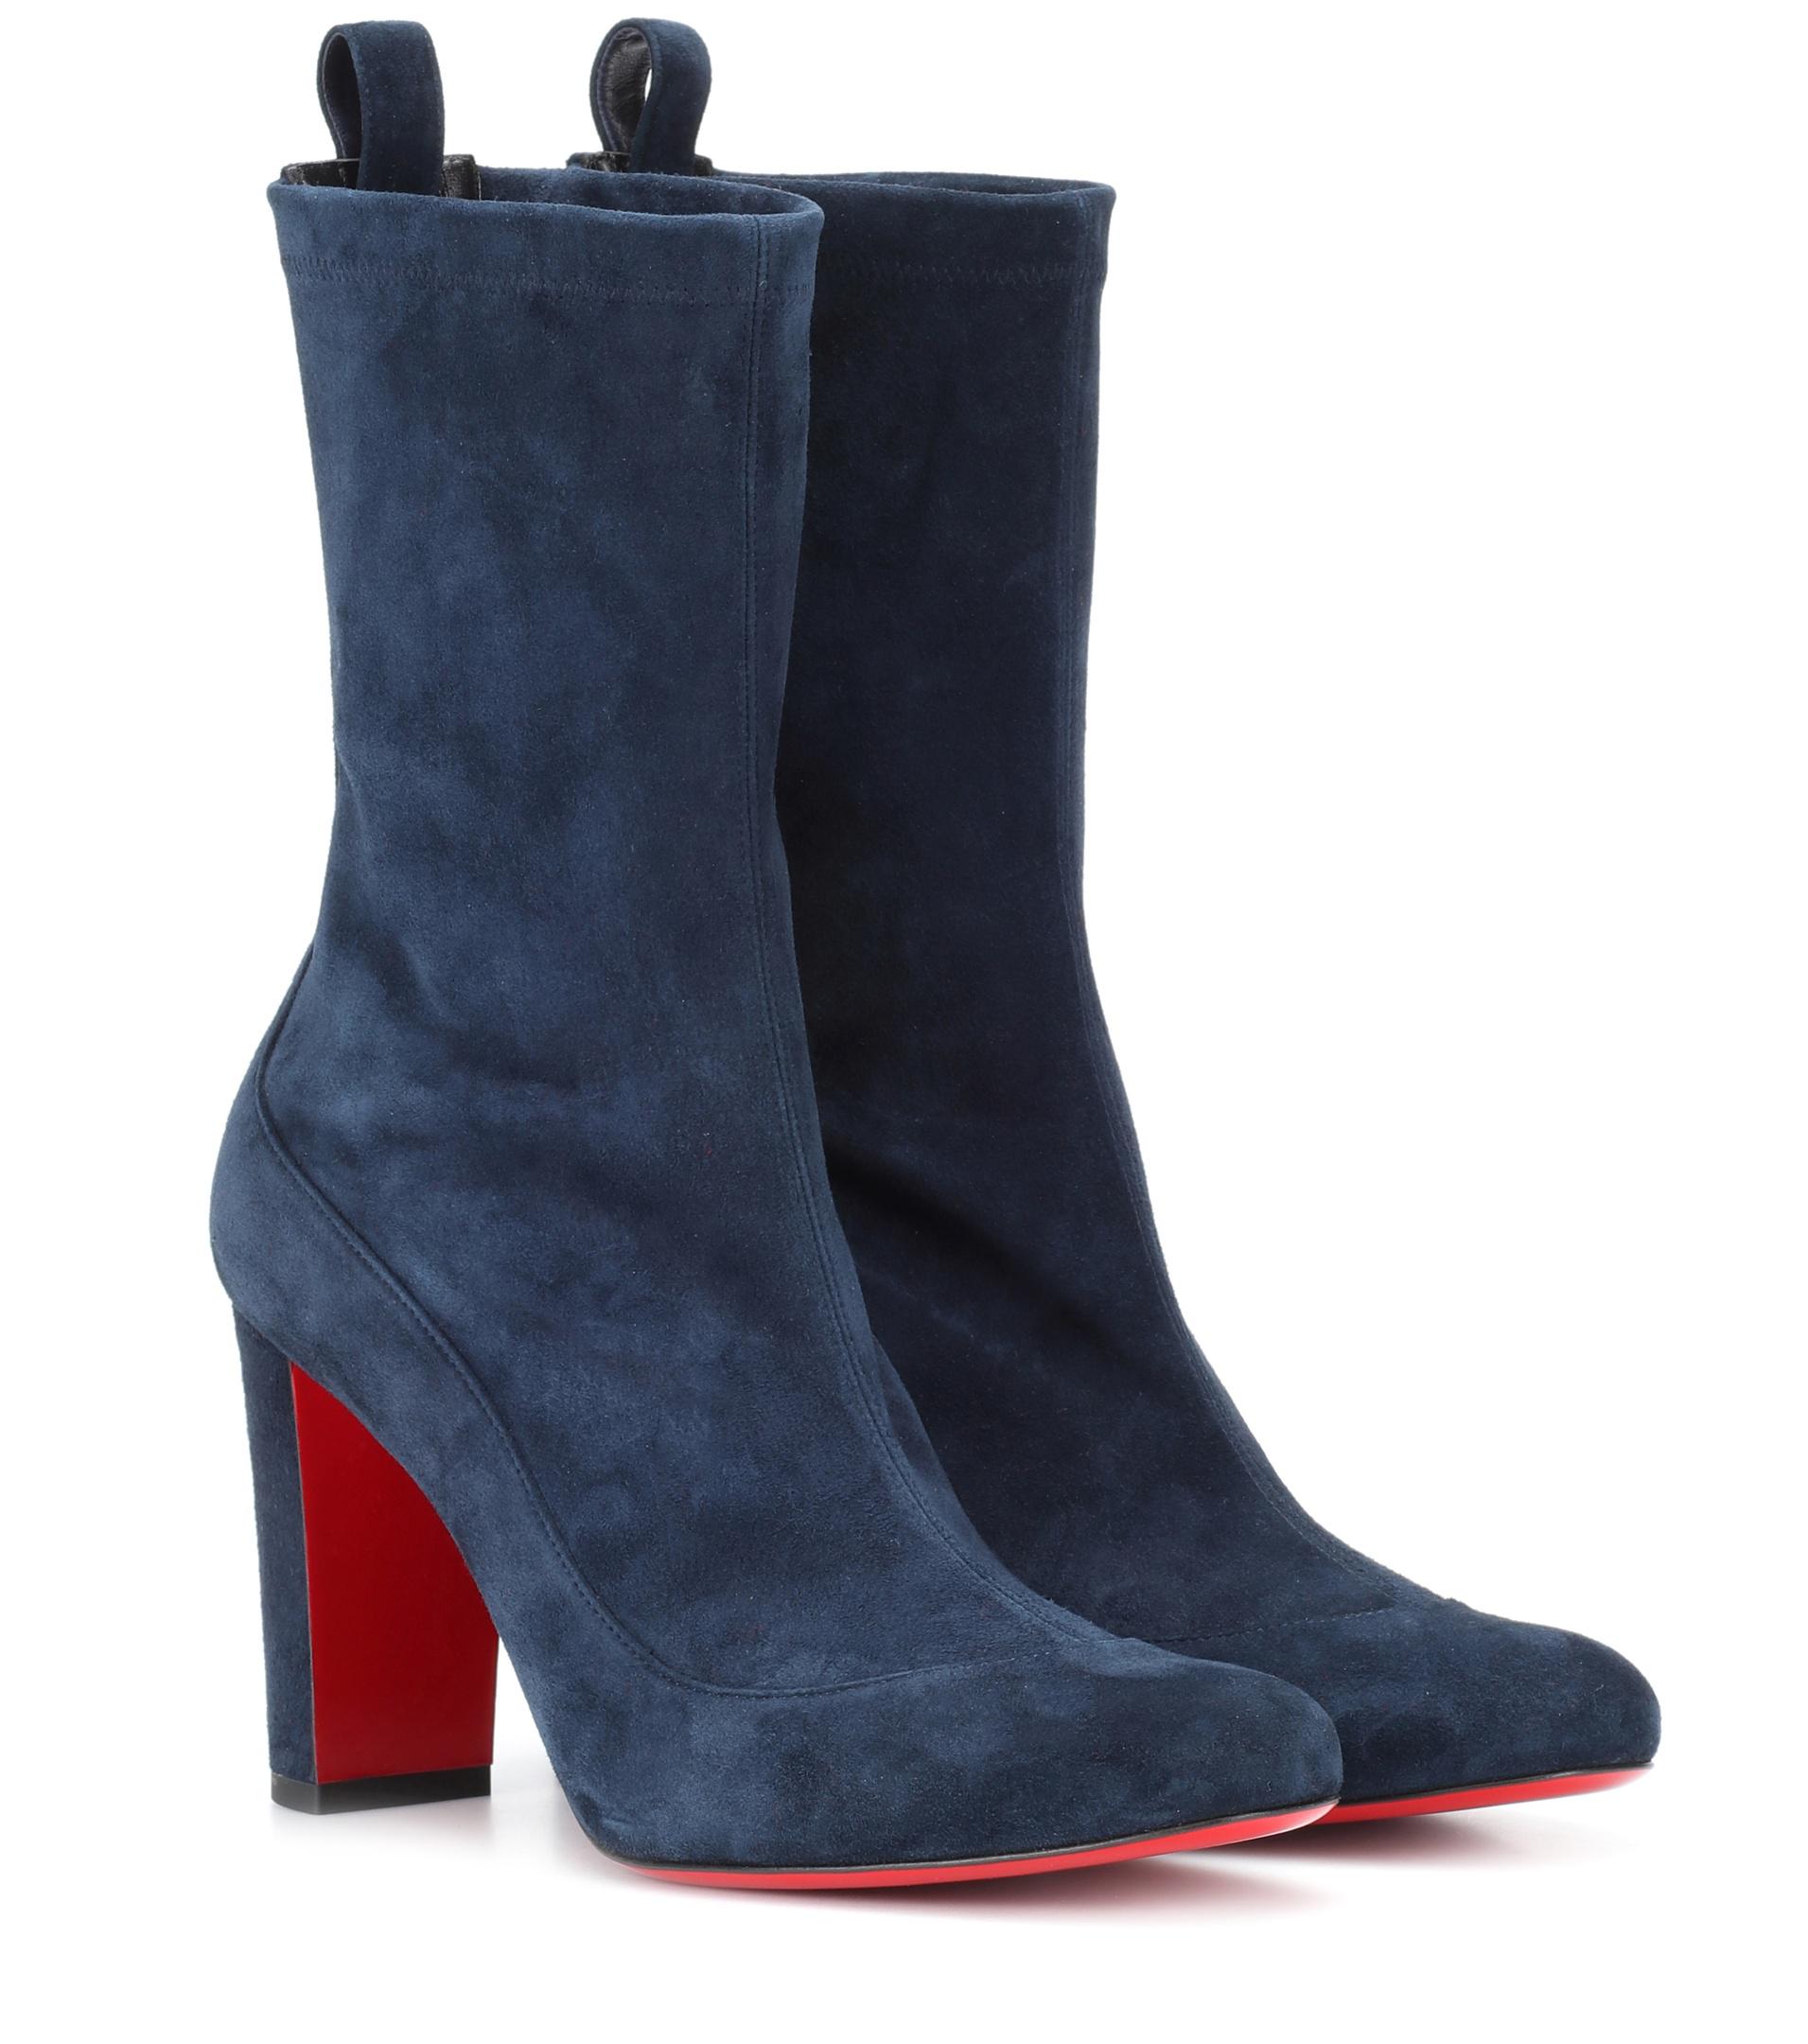 Louboutin Gena 85 Suede Ankle Boots in Blue | Lyst